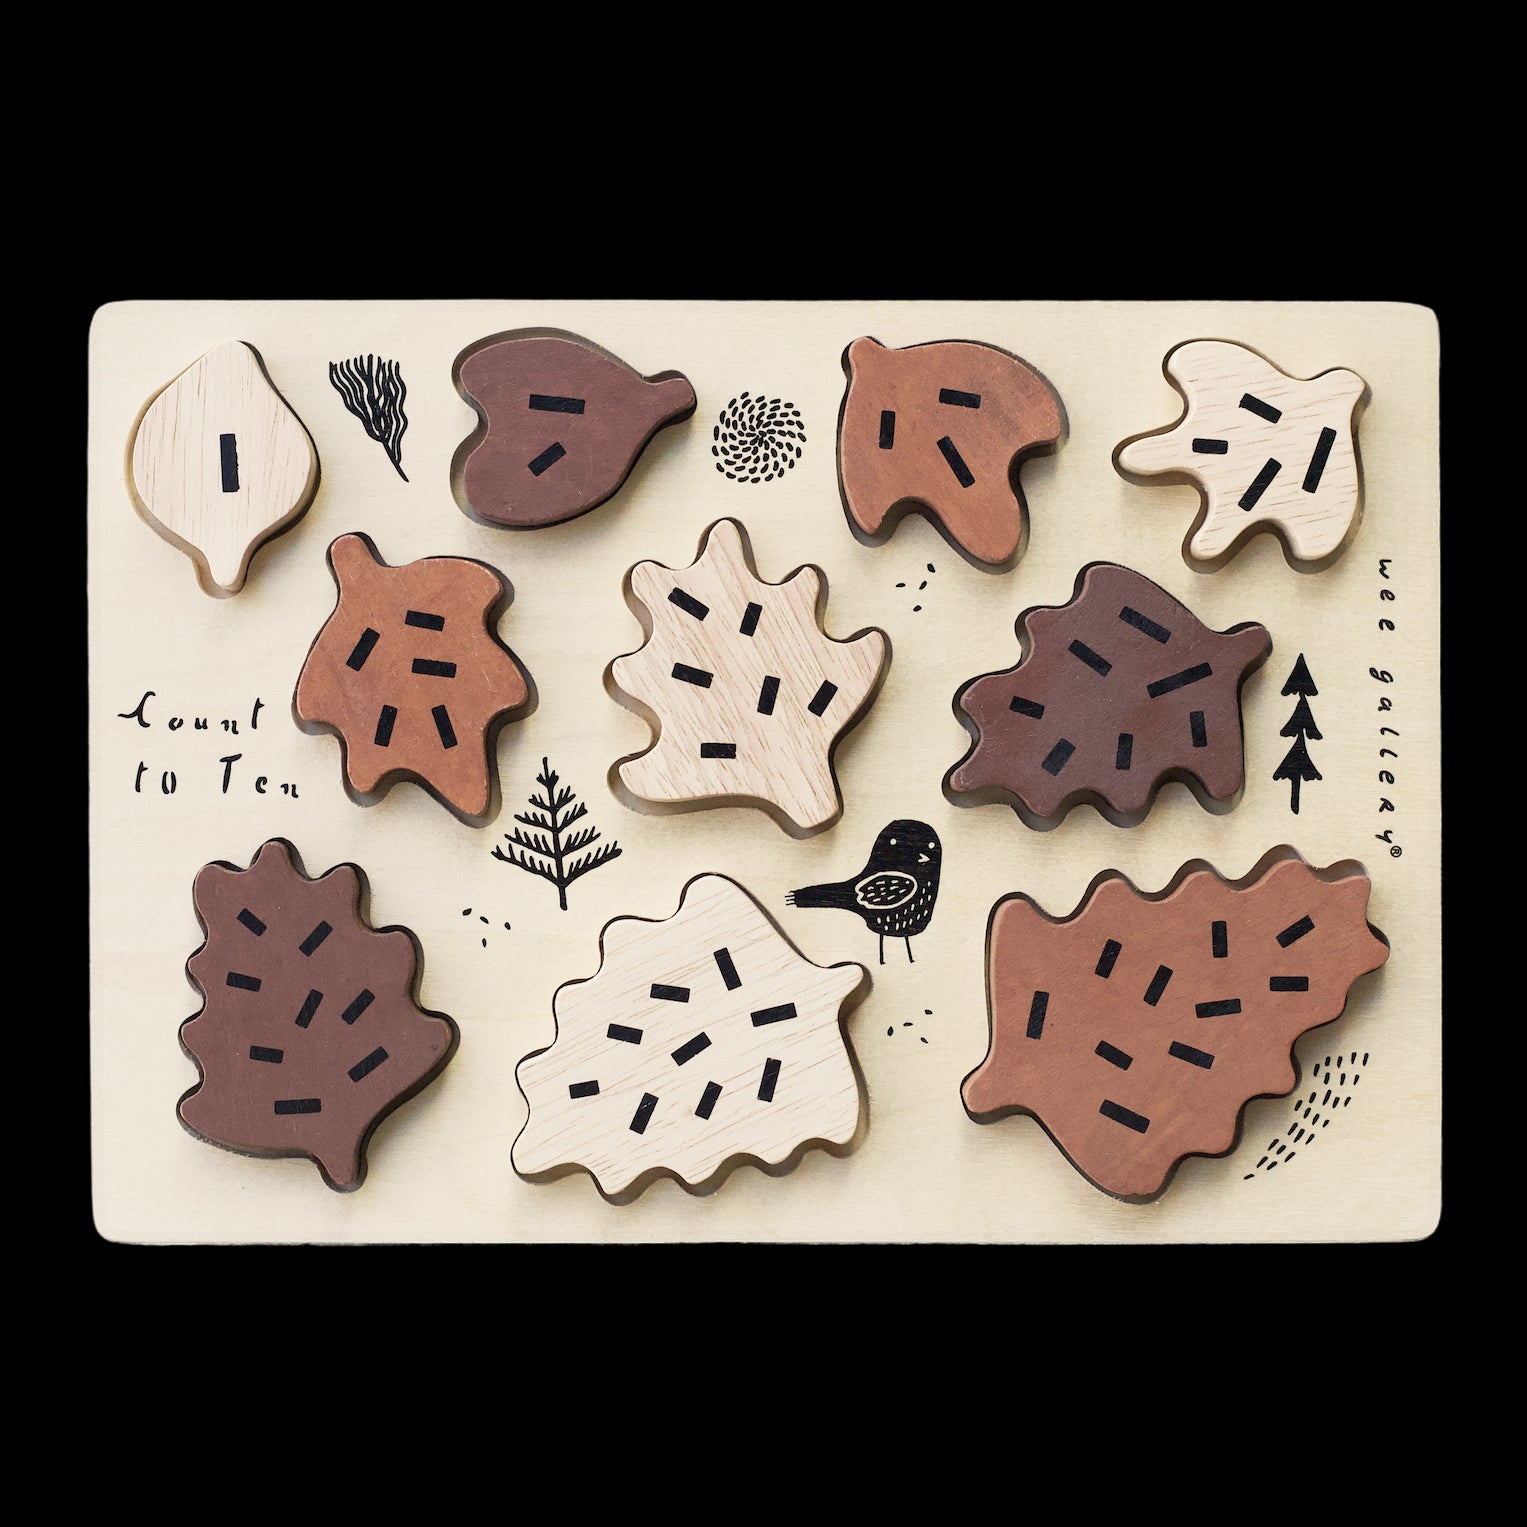 Wooden Tray Puzzle - Count To 10 Leaves